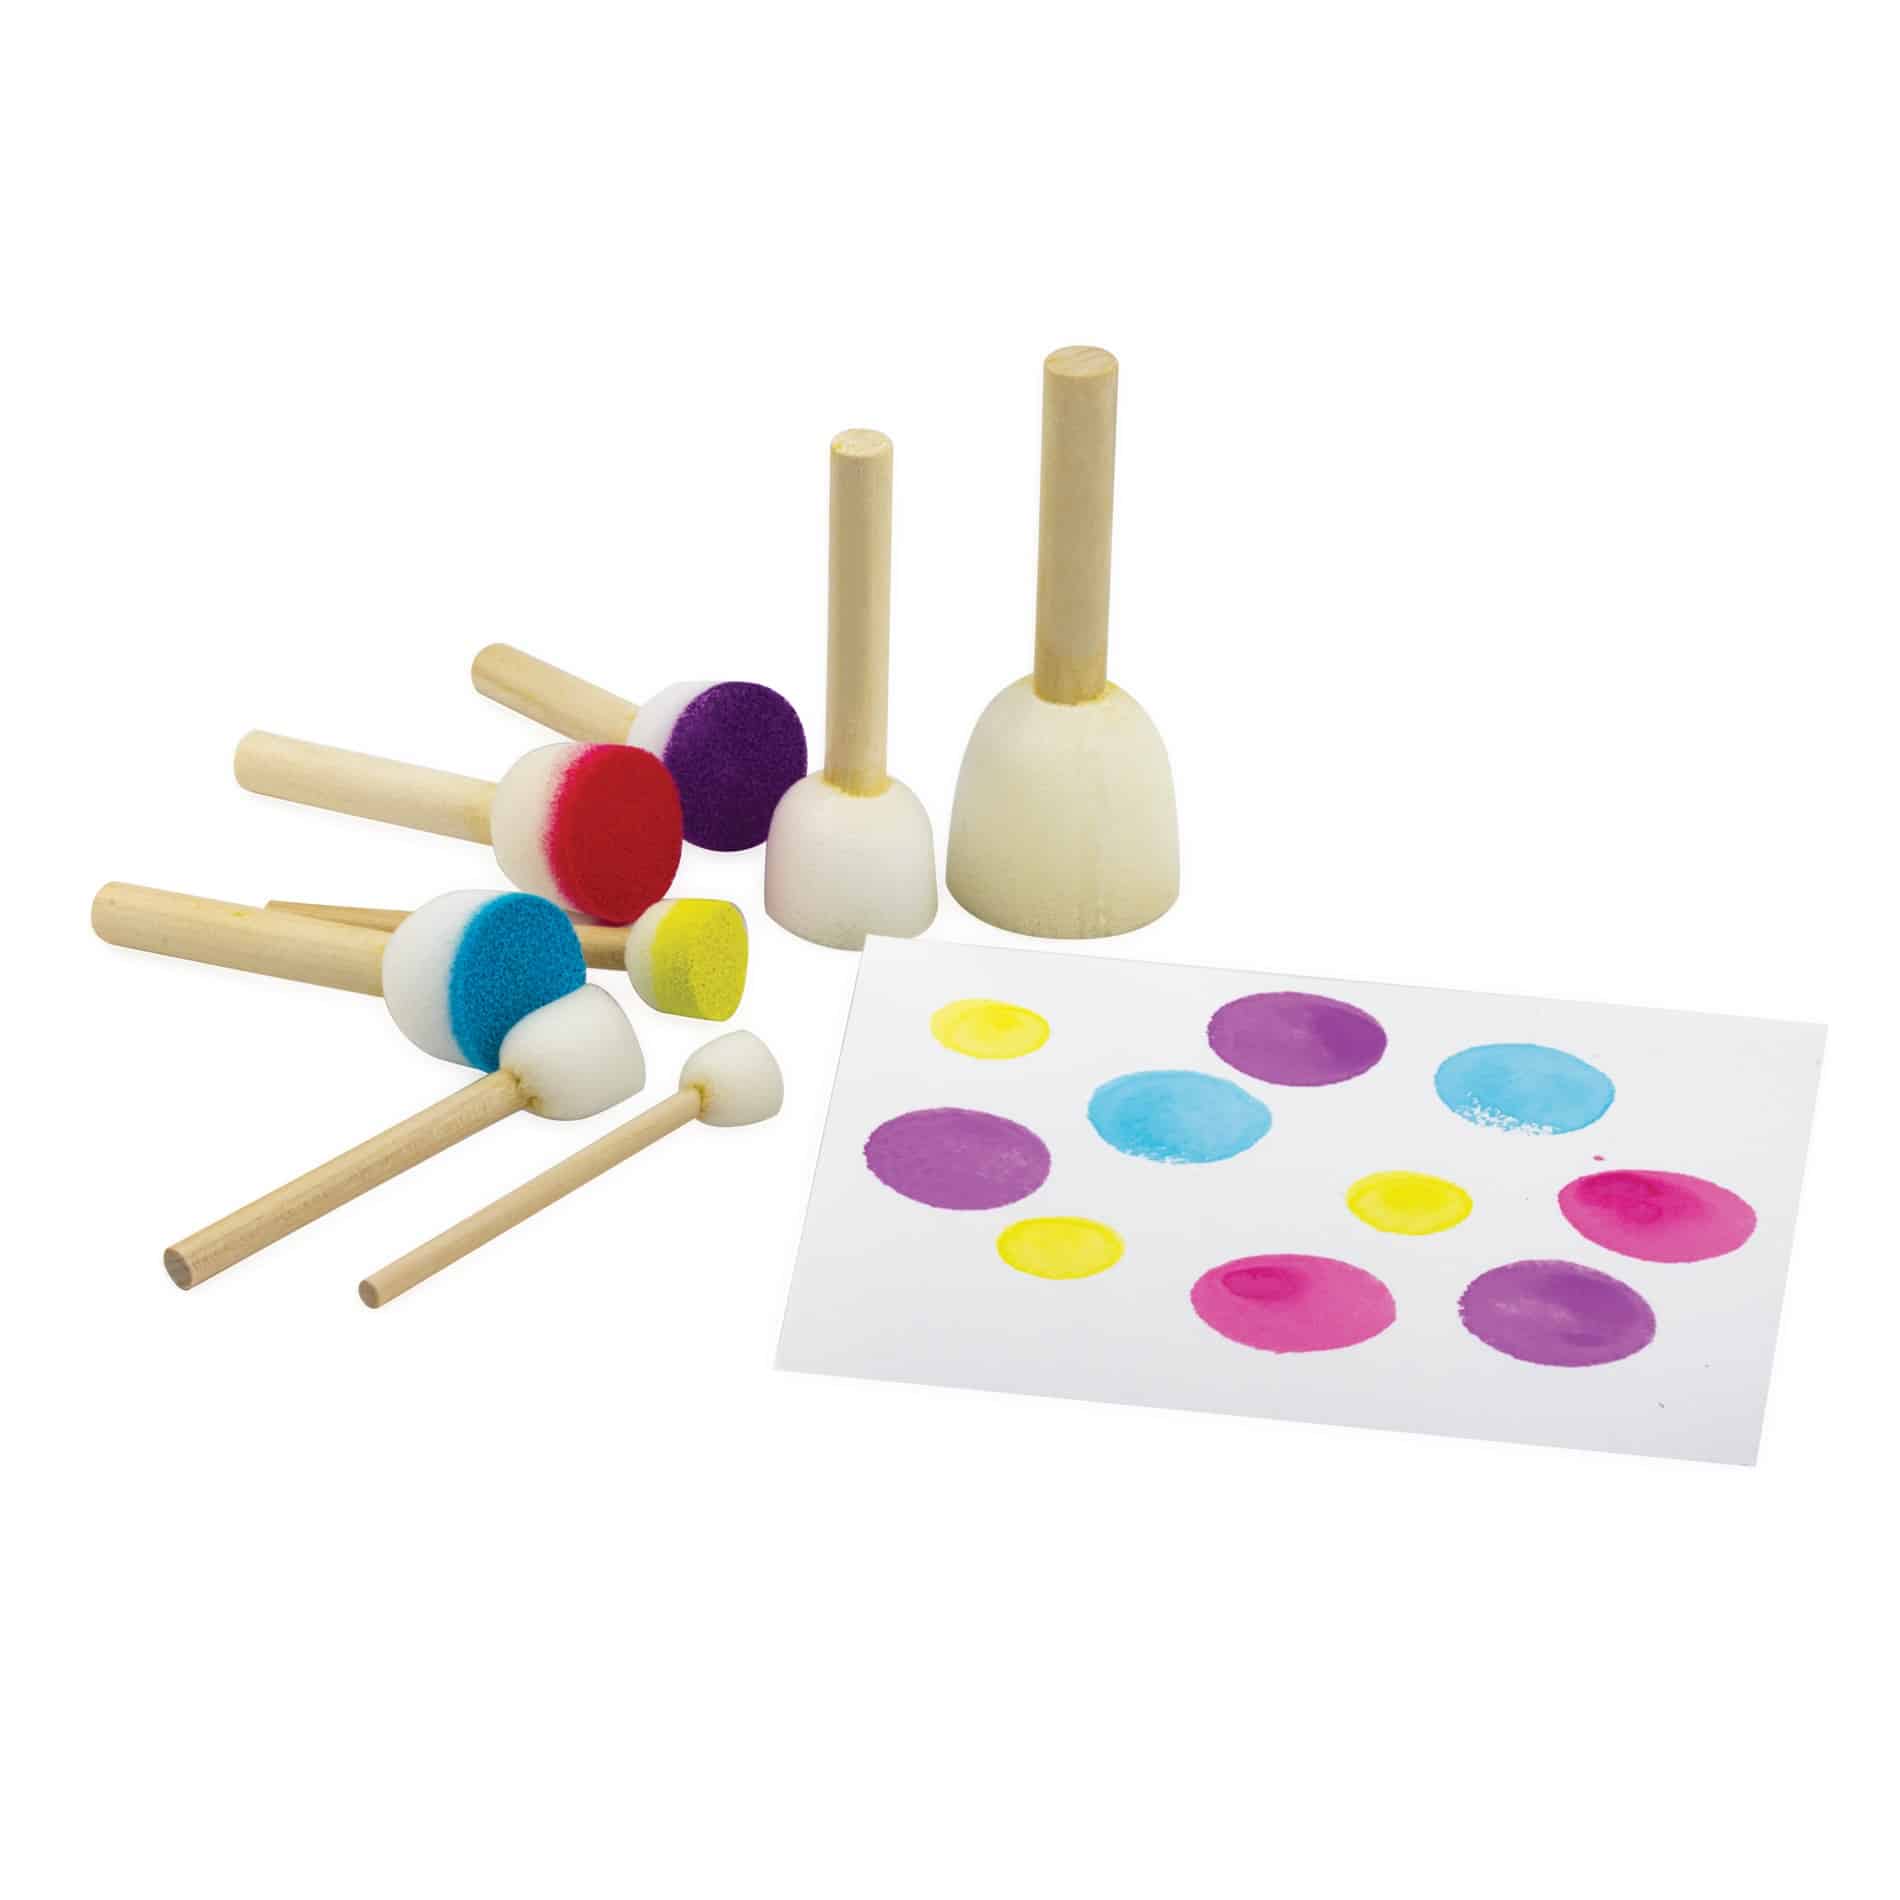 Craft Foam Rollers and Paint Tray  Craft and Classroom Supplies by Hygloss